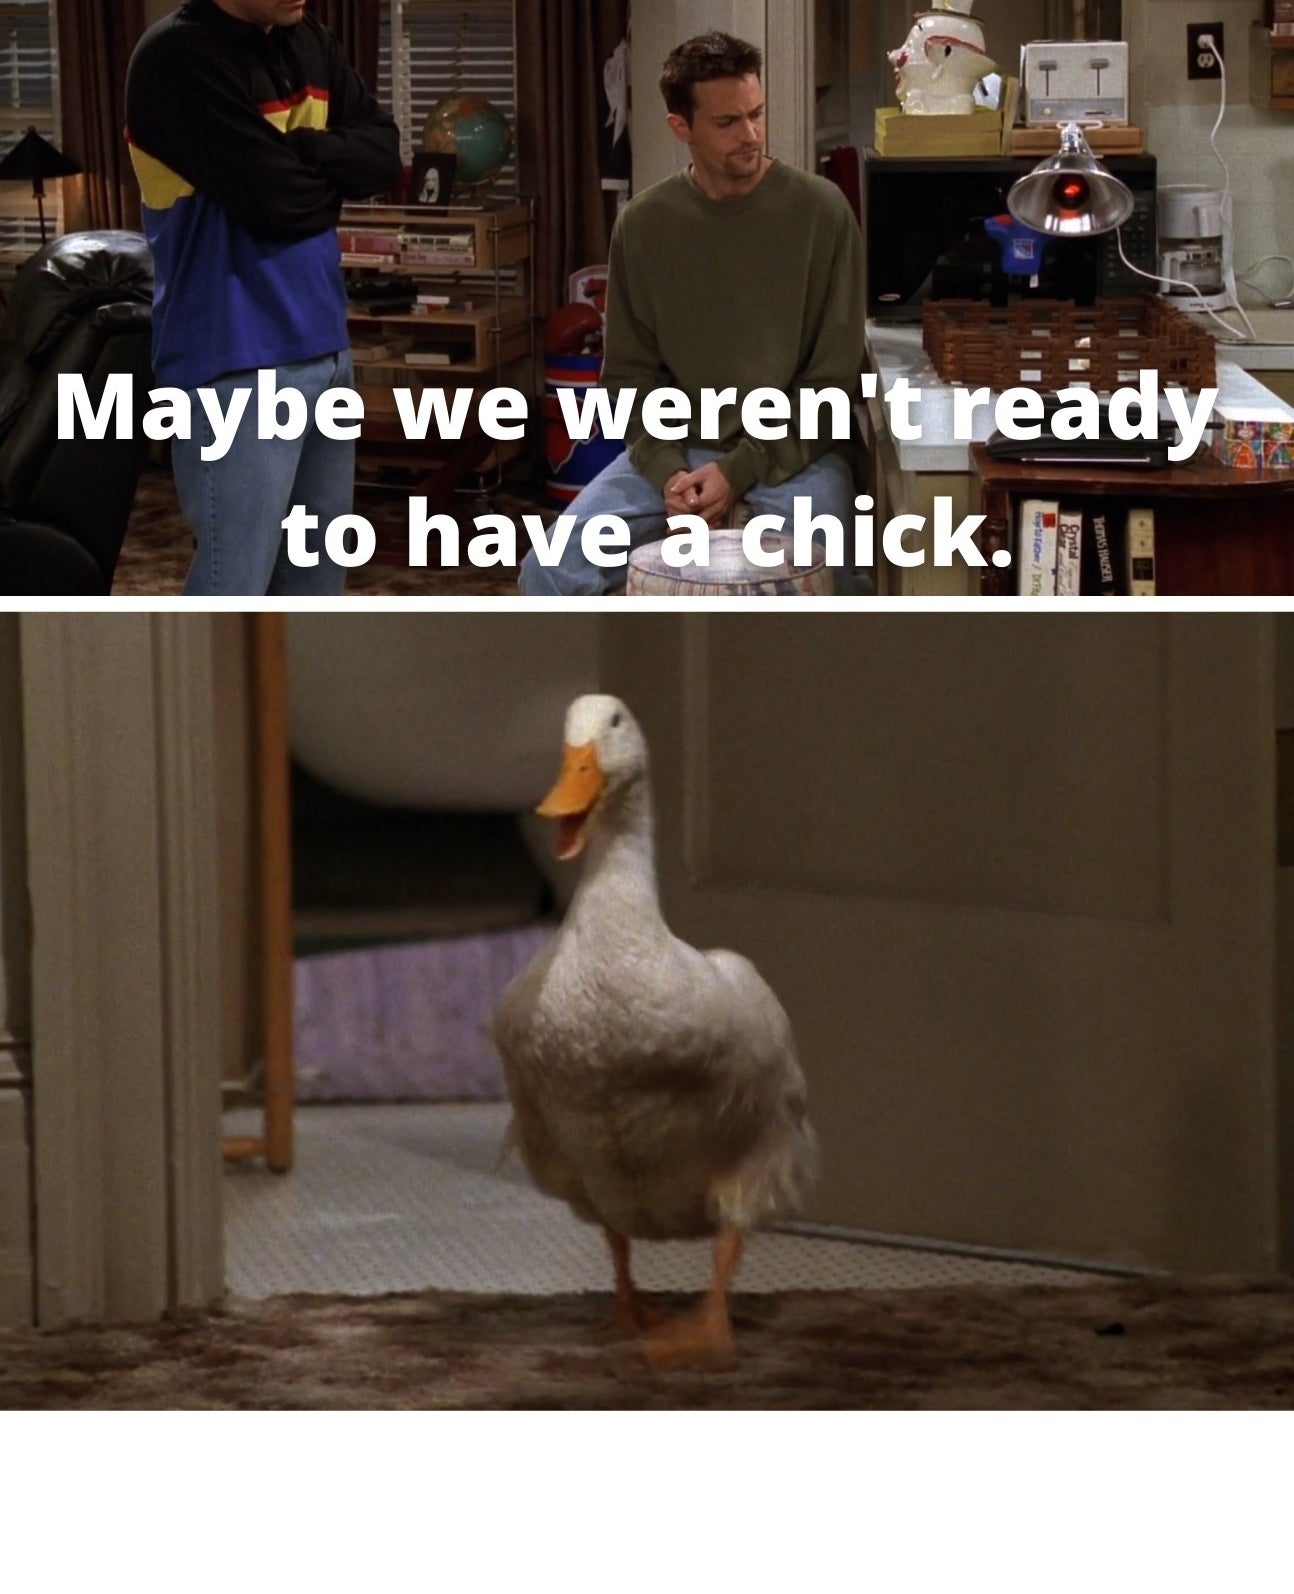 Chandler telling Joey &quot;Maybe we weren&#x27;t ready to have a chick&quot; and a duck walking out of the bathroom